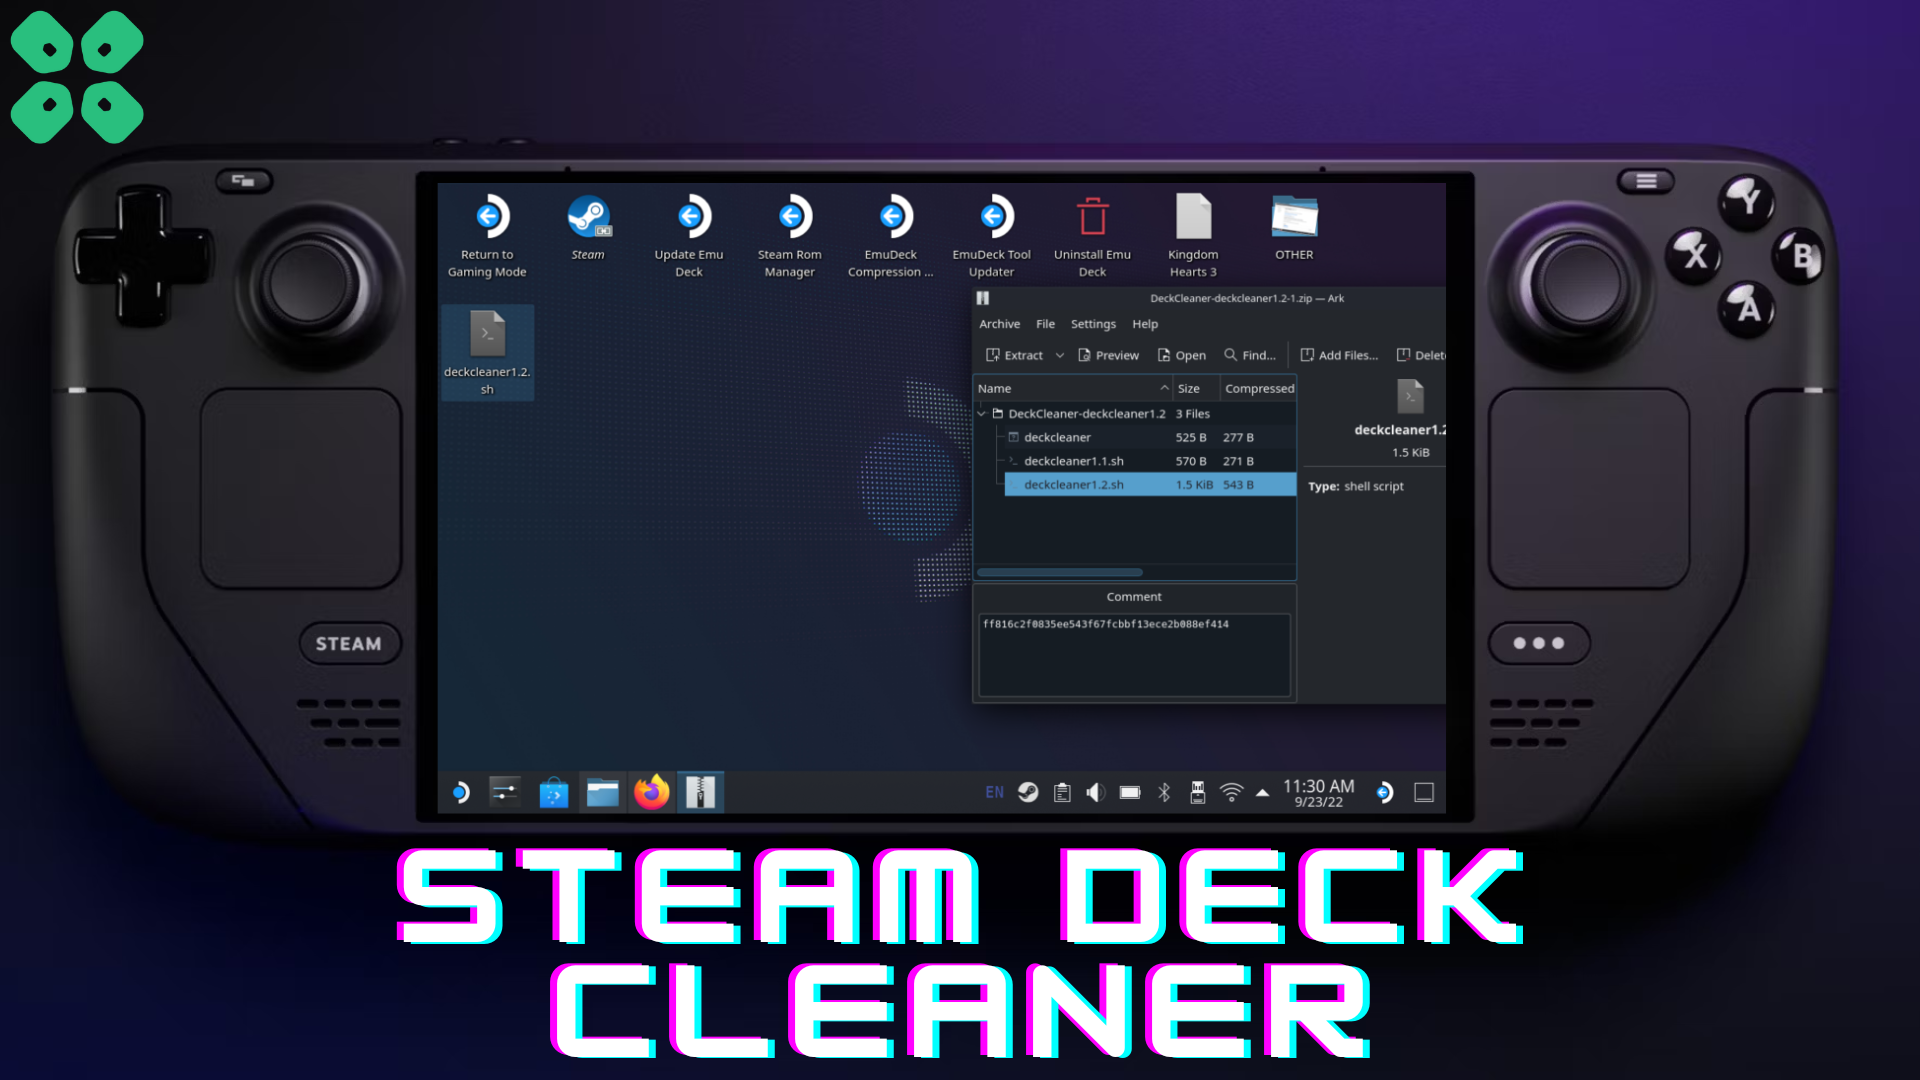 How to Use Steam Deck Cleaner